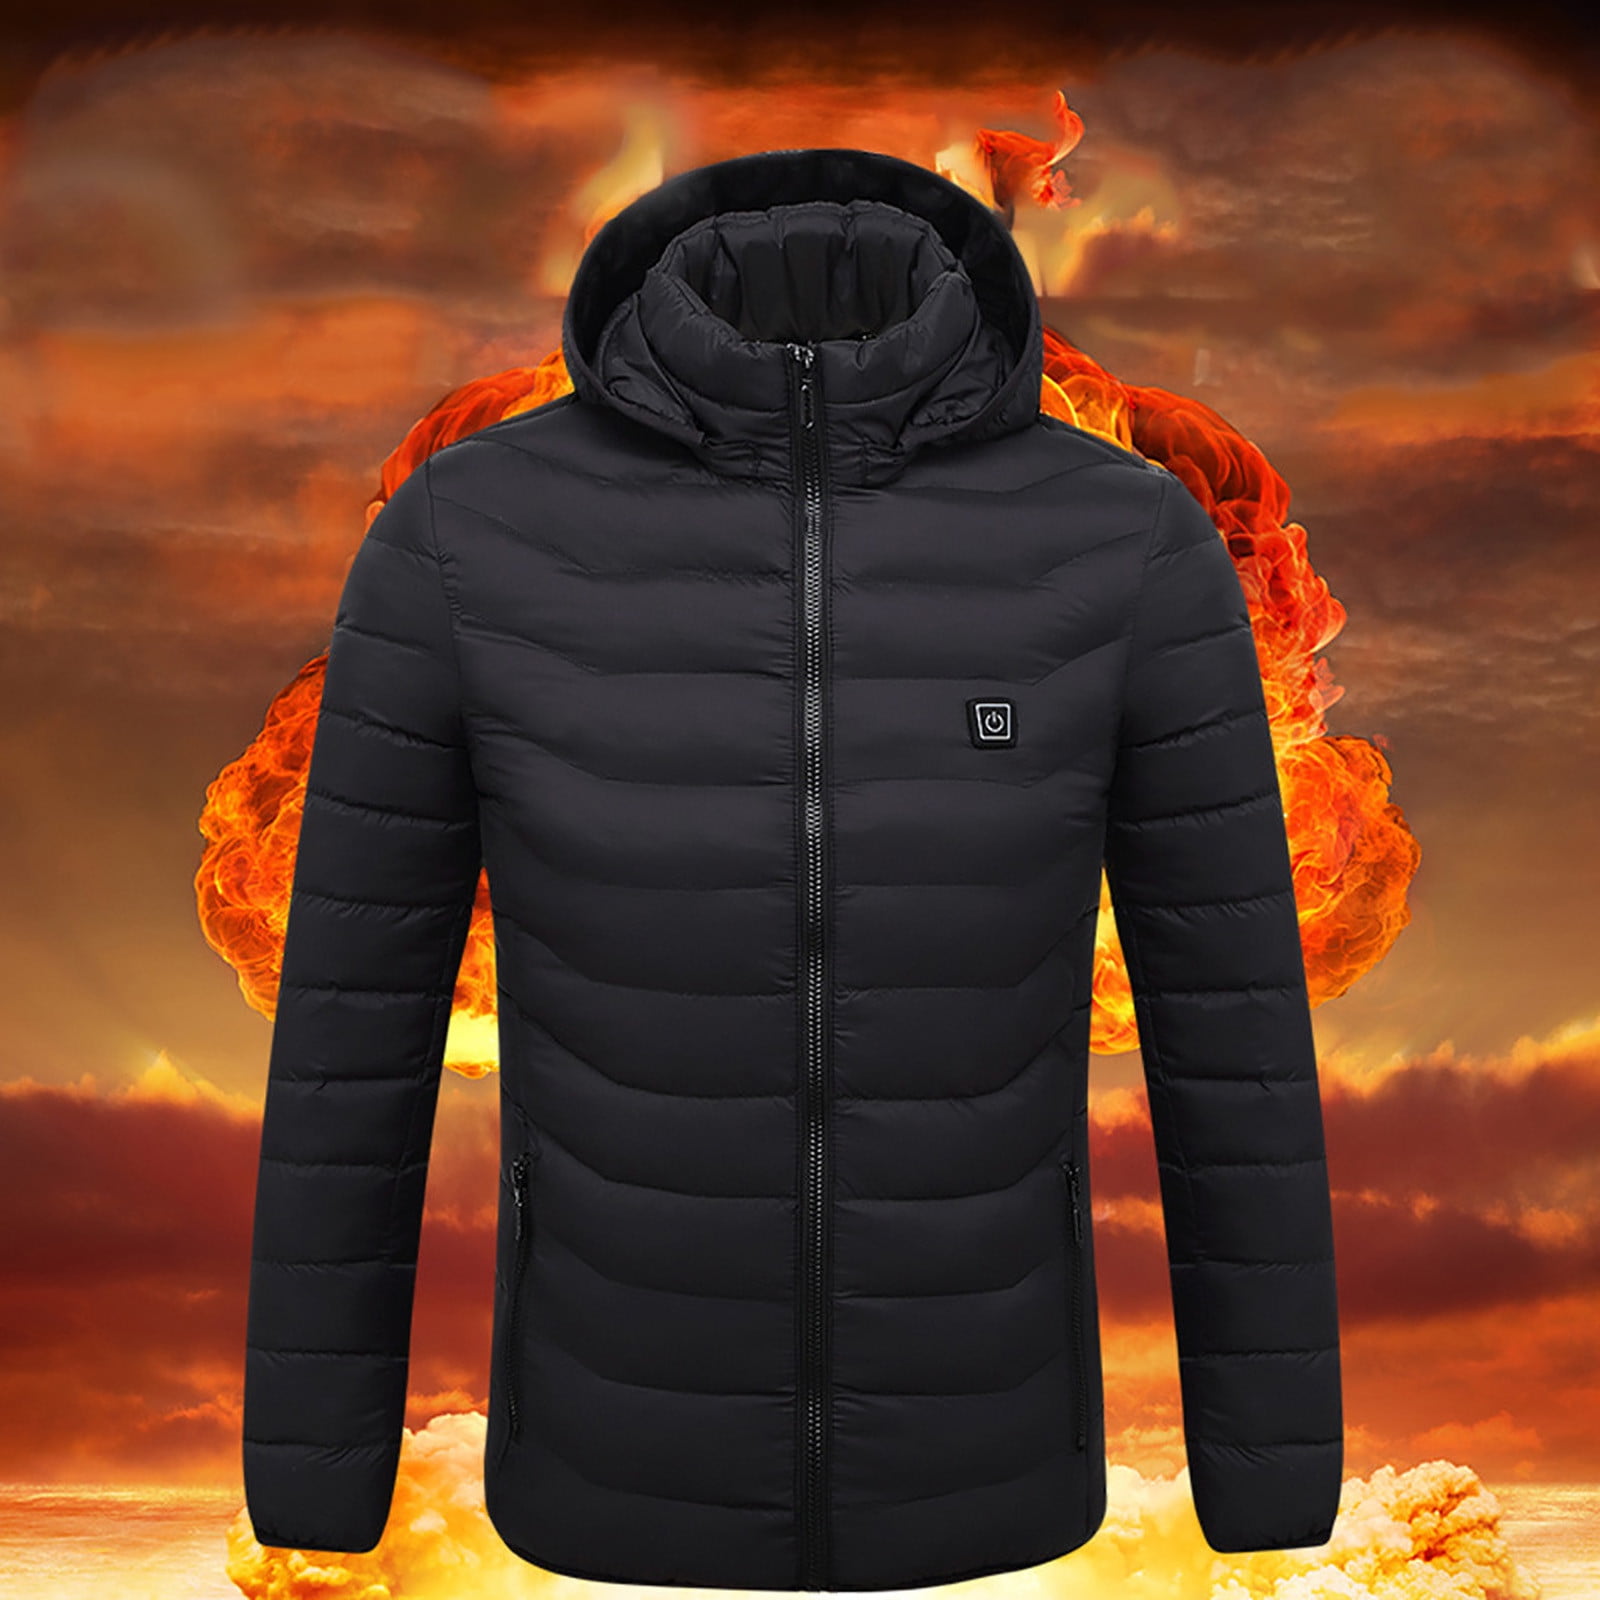 Munlar Sports Jackets for Men-Outdoor Warm Clothing Heated For Riding  Skiing Fishing Charging Via Heated Rain Coats Christmas Winter Coat  Clearance 